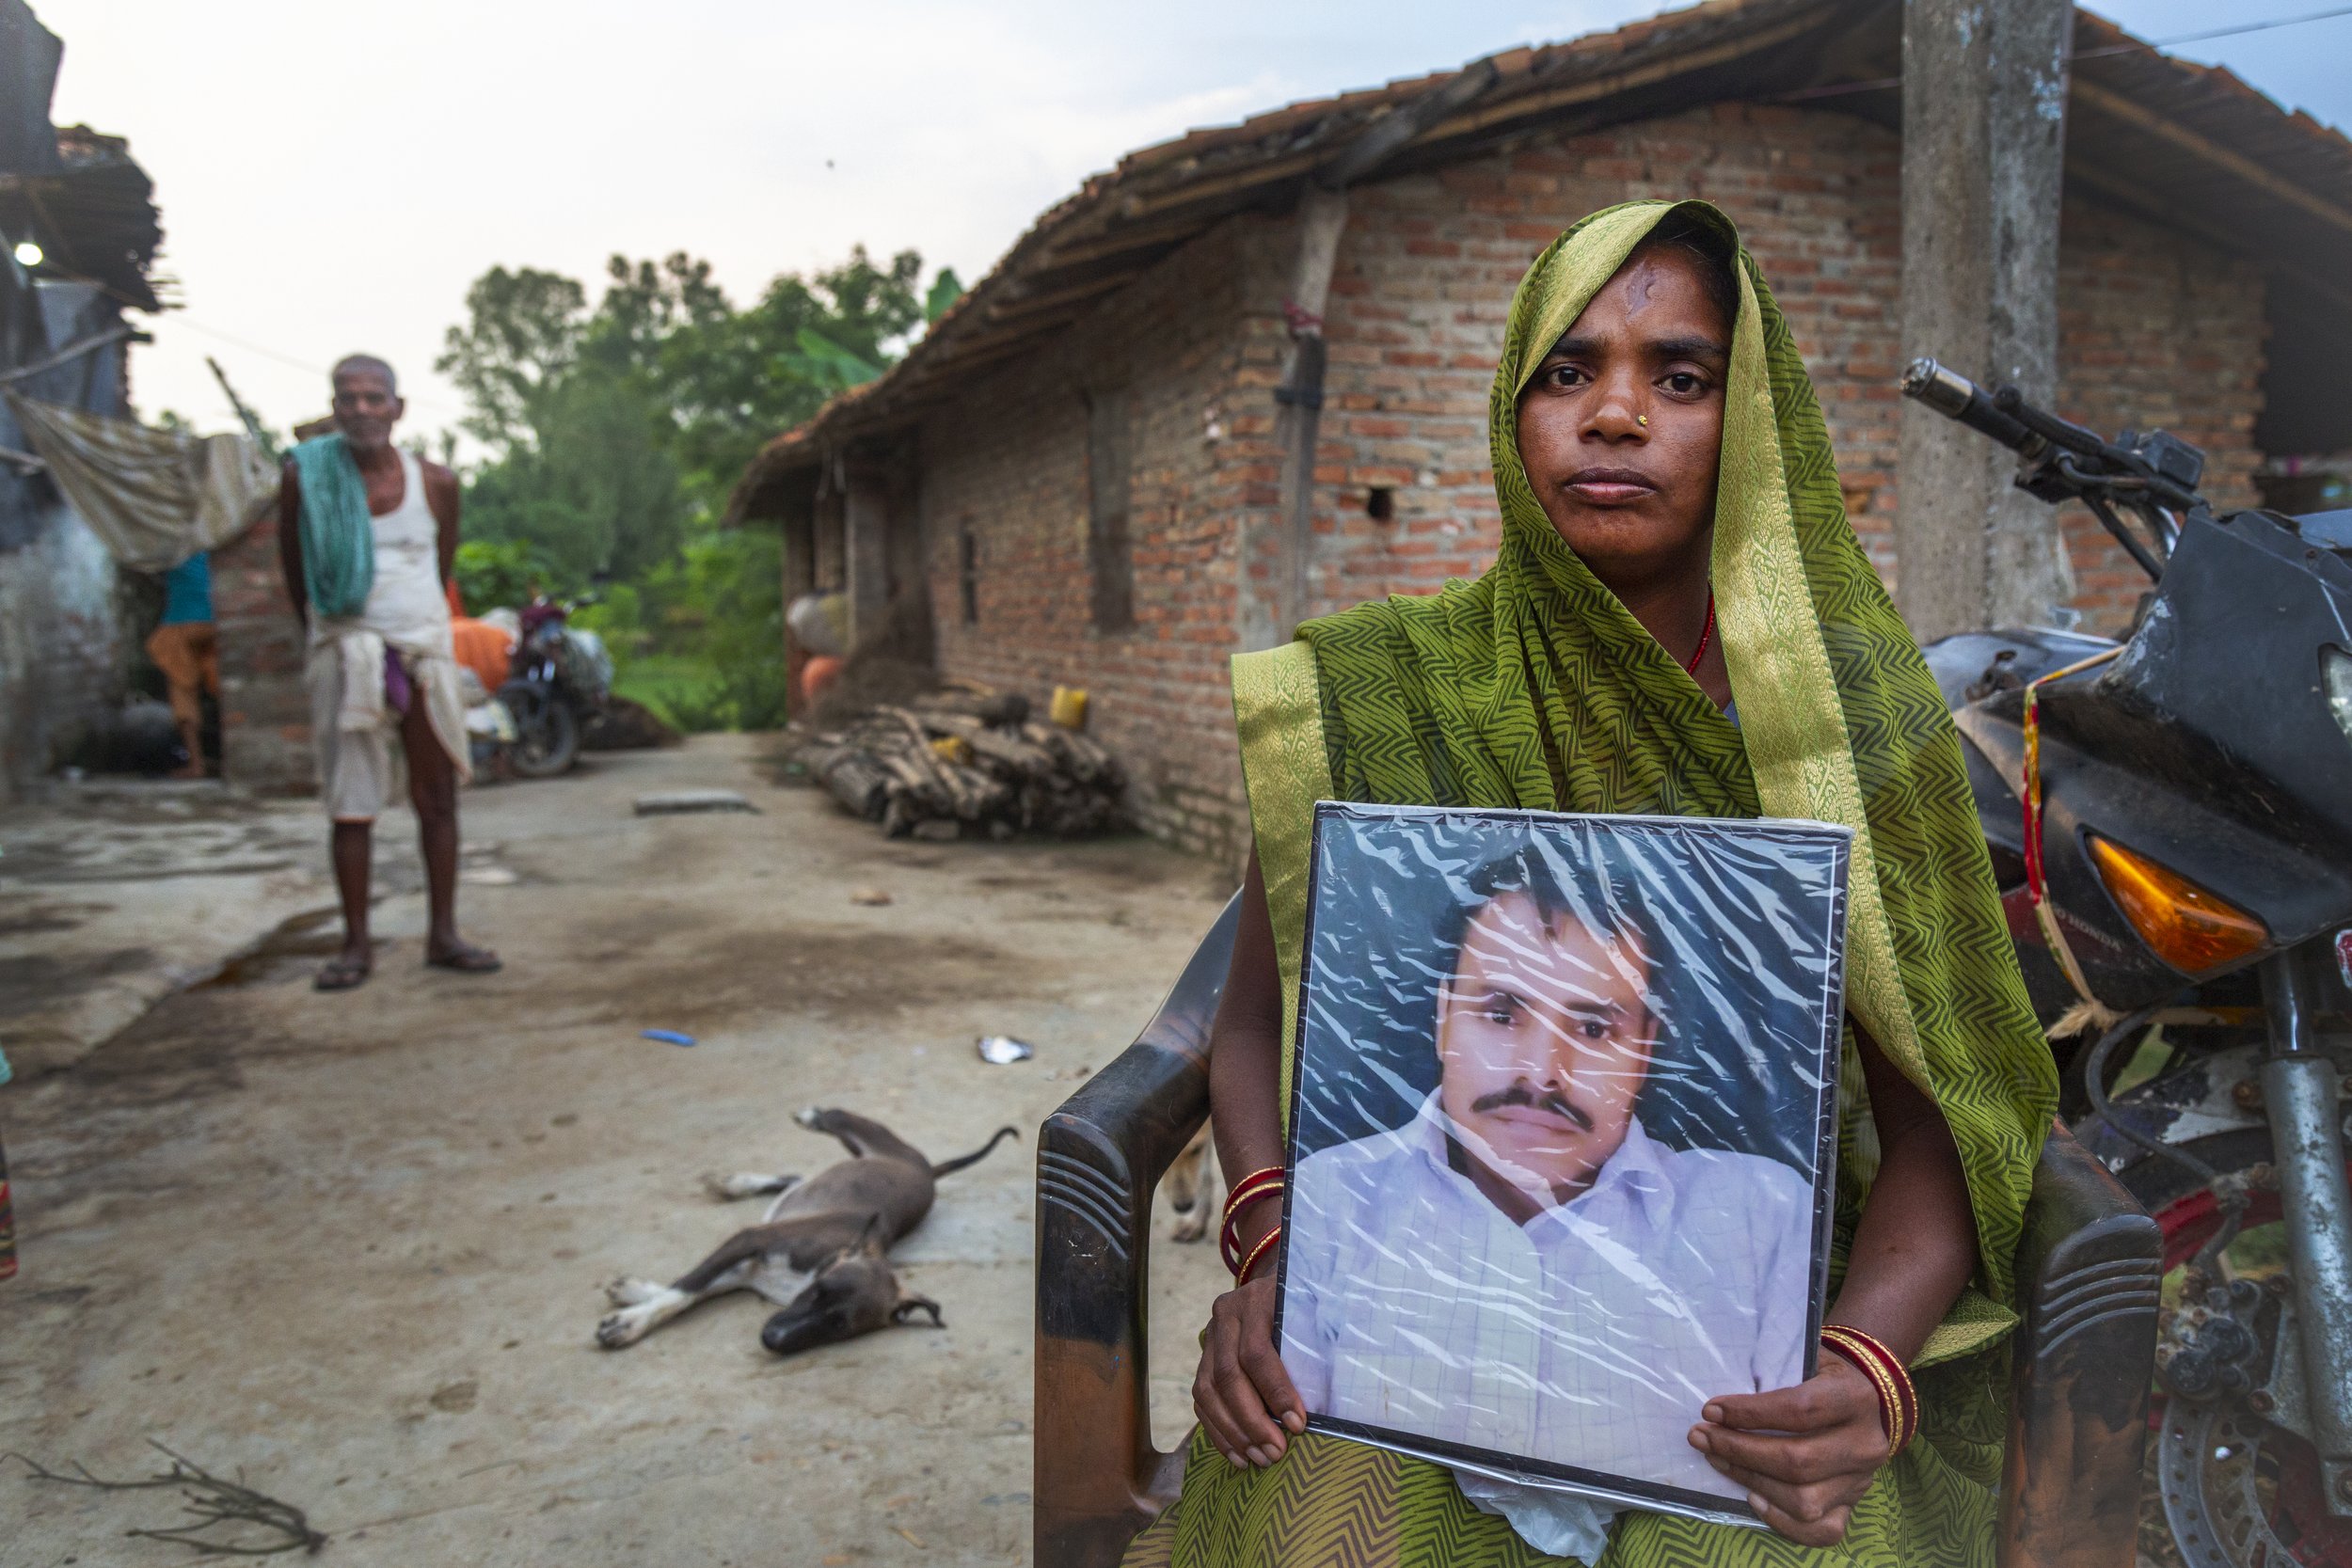  Manju Devi Mandal, 38, holds a portrait of her husband, Kripal Mandal, in the village of Nagrain 9, in the Ghodhas District outside of Janakpur, Nepal on July 1, 2022.   Her husband died at age 40 of a heart attack in Qatar.   Her brother-in-law is 